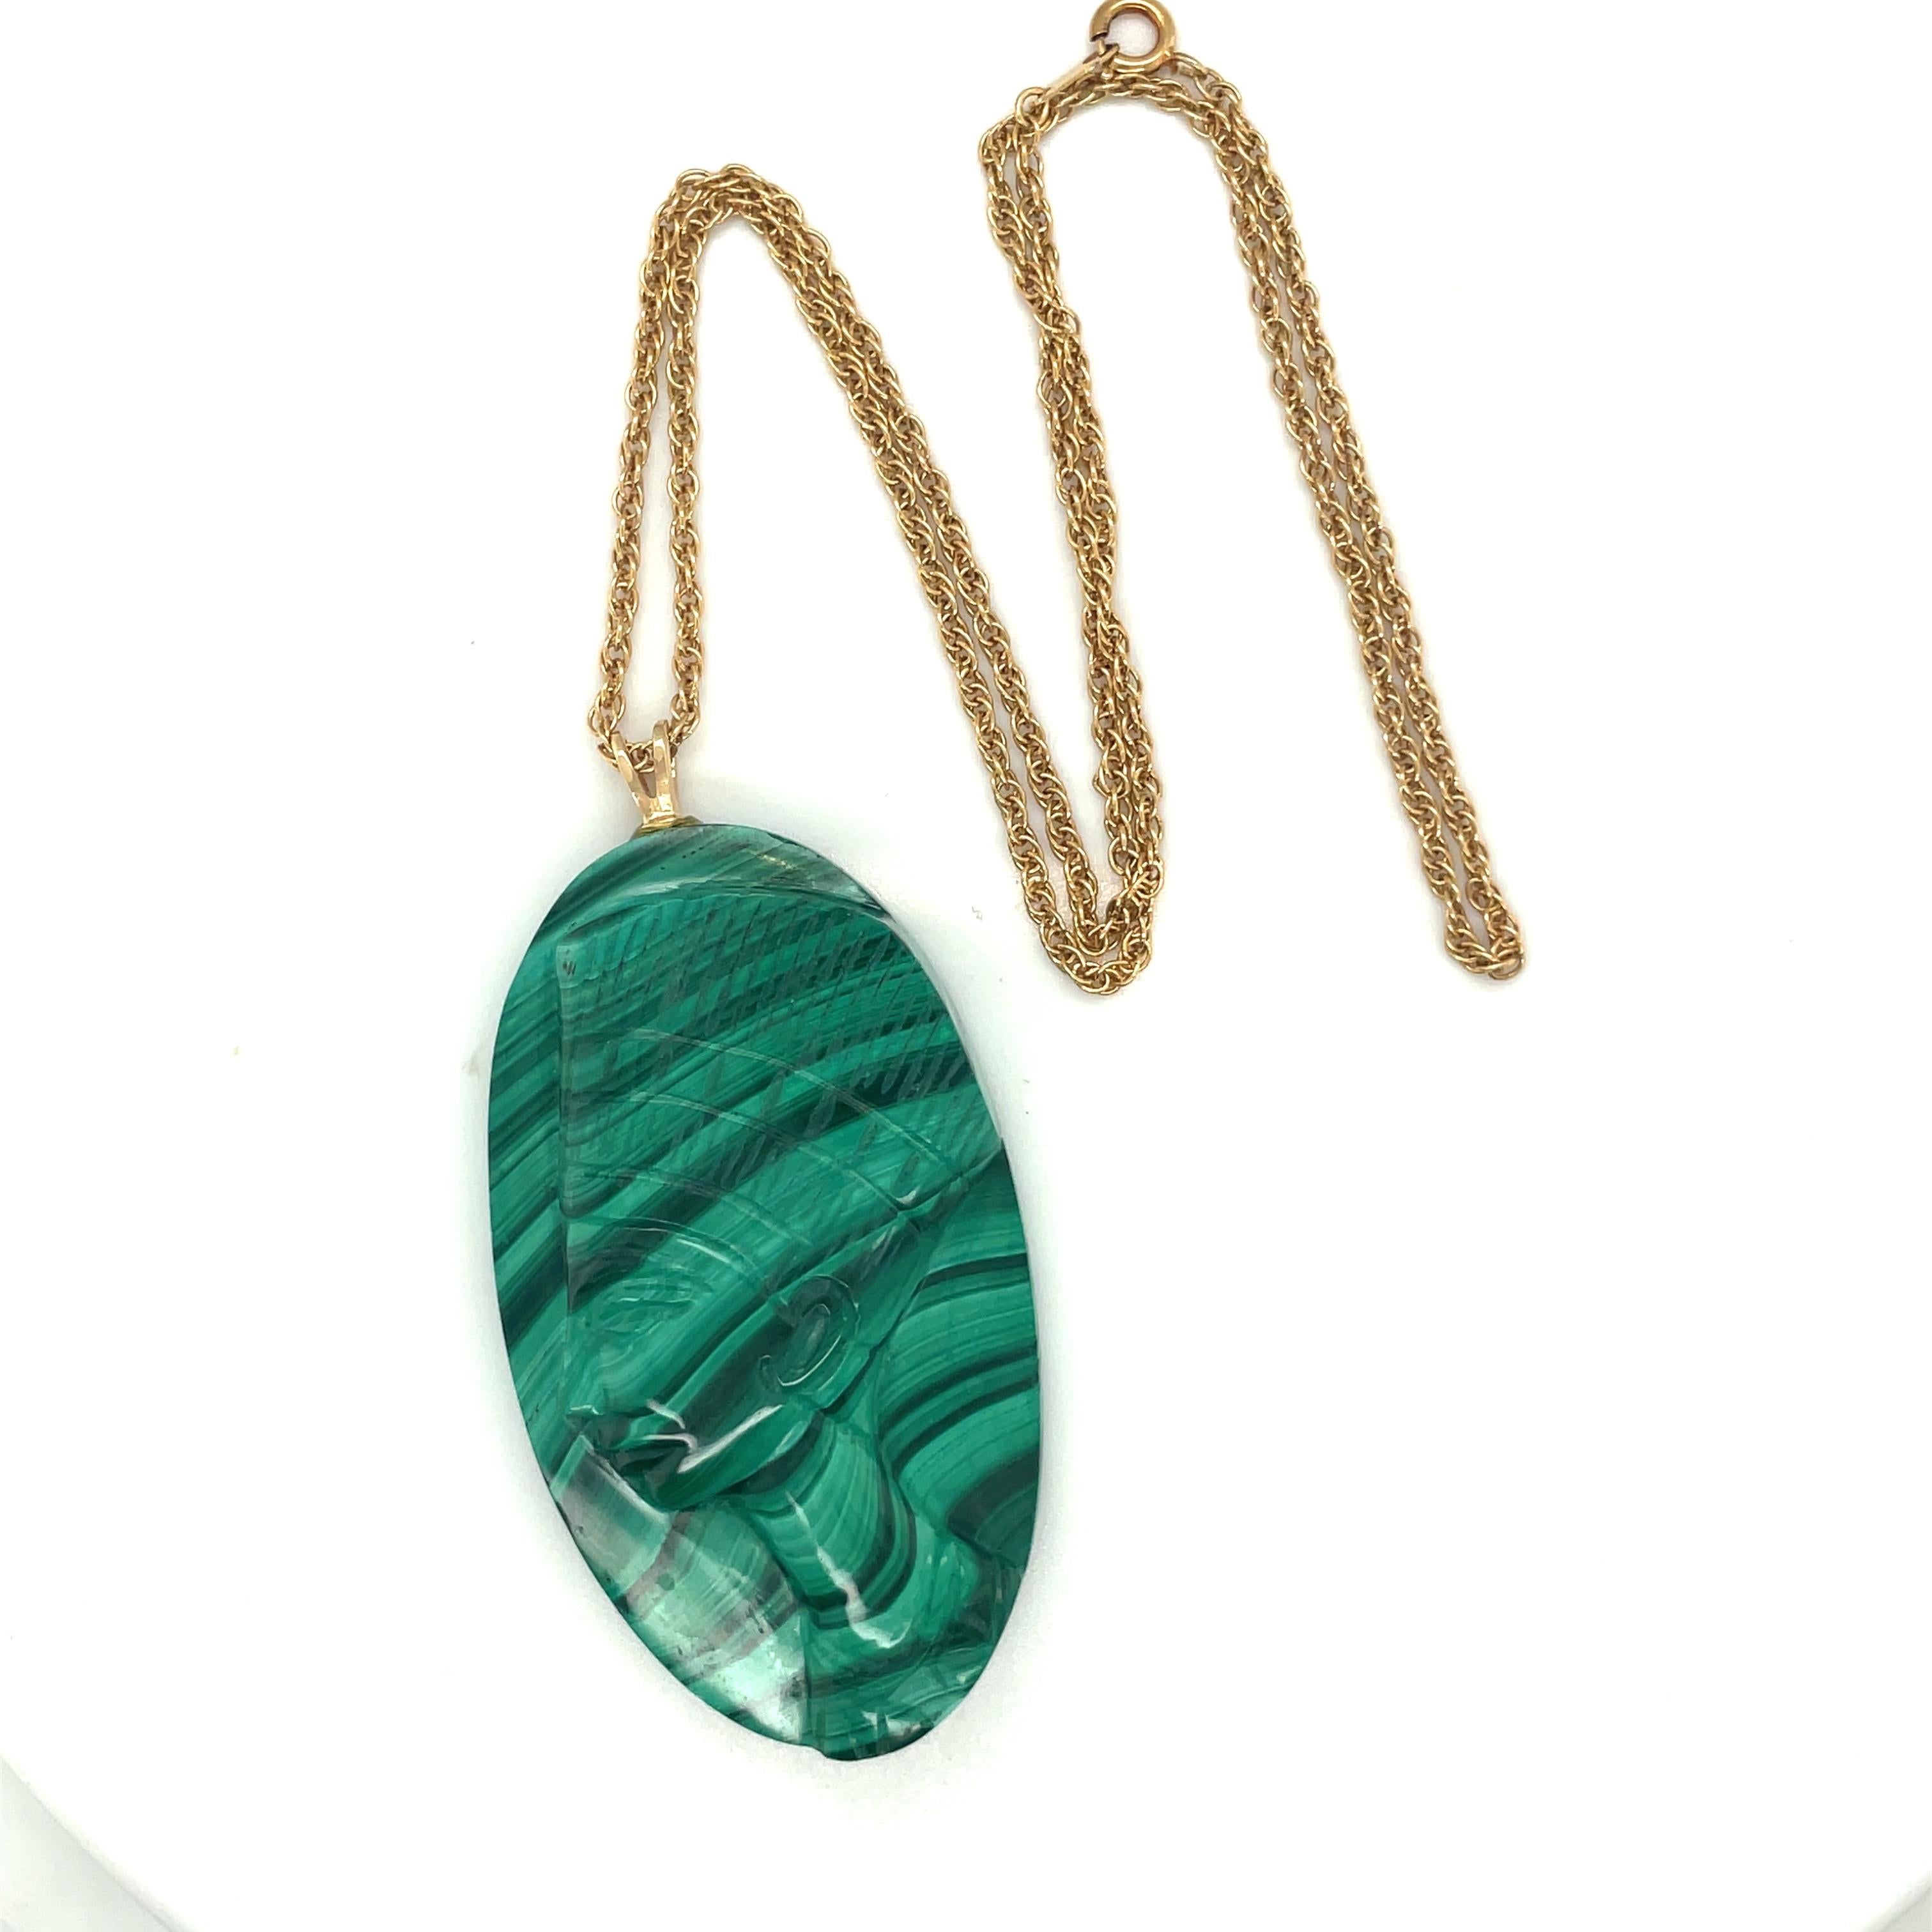 Measuring 2 inches long, this stunning carved malachite pendant is sure to strike up conversation. The carving appears to be the profile of an Egyptian ( goddess) and hangs from a 14 karat yellow gold chain measuring 16